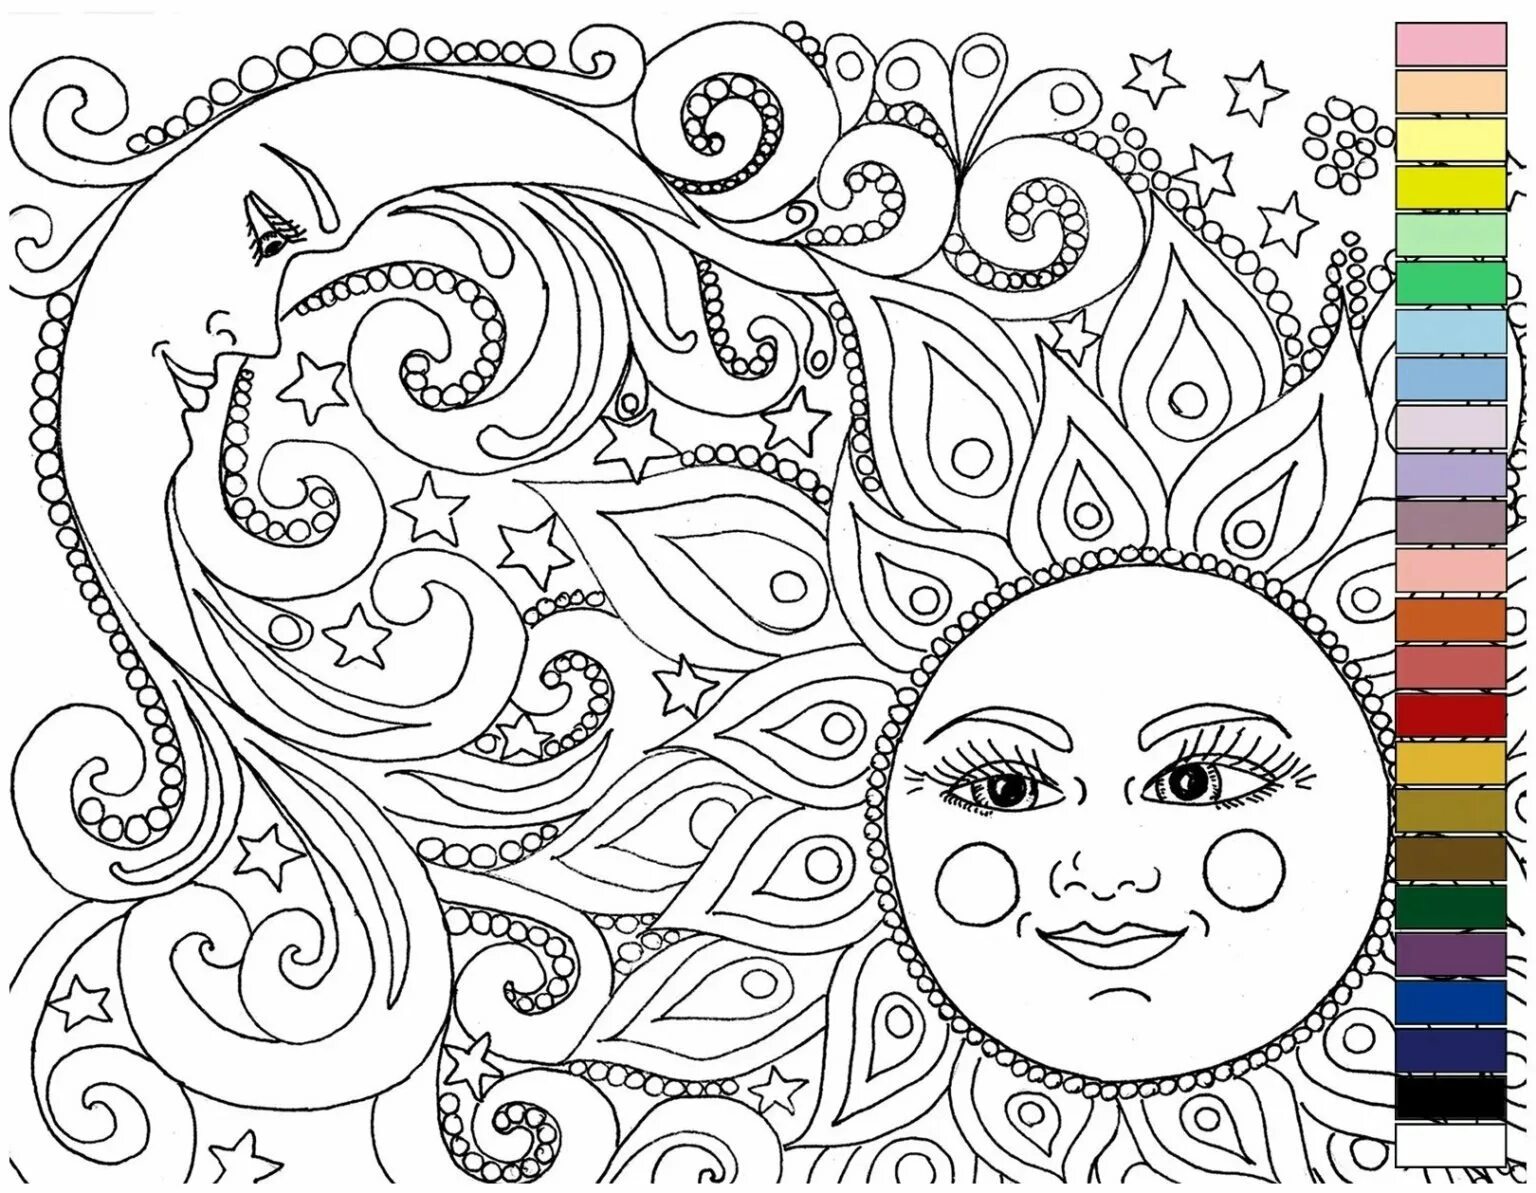 Deluxe coloring book for adults, large